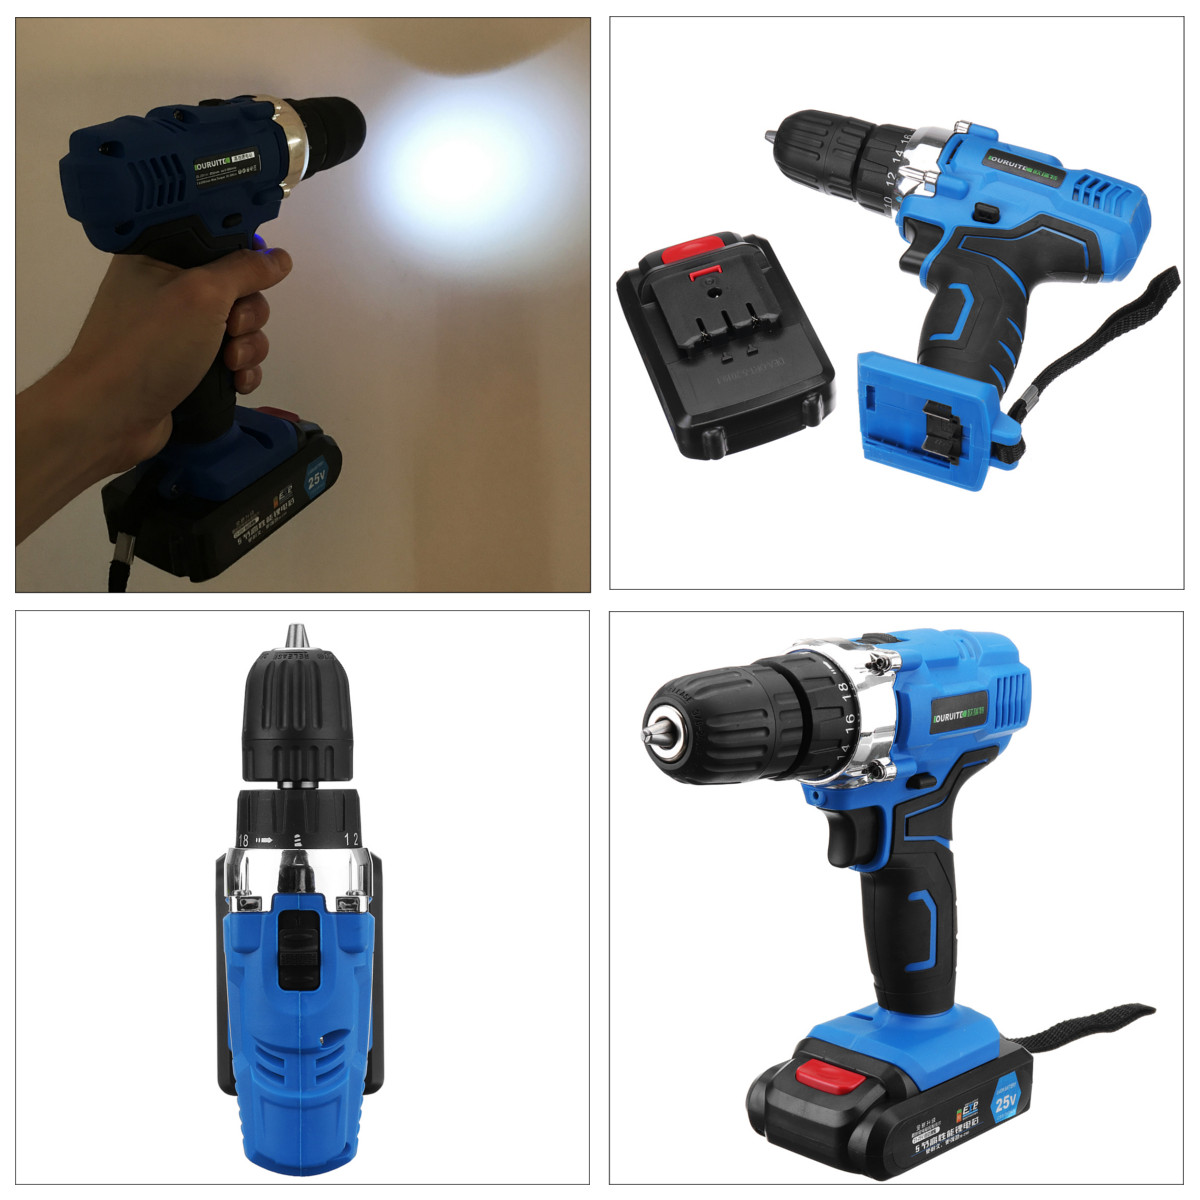 25V-Dual-Speed-Cordless-Drill-Driver-Electric-Drill-Rechargable-Power-Drills-Driver-Tool-1414380-9